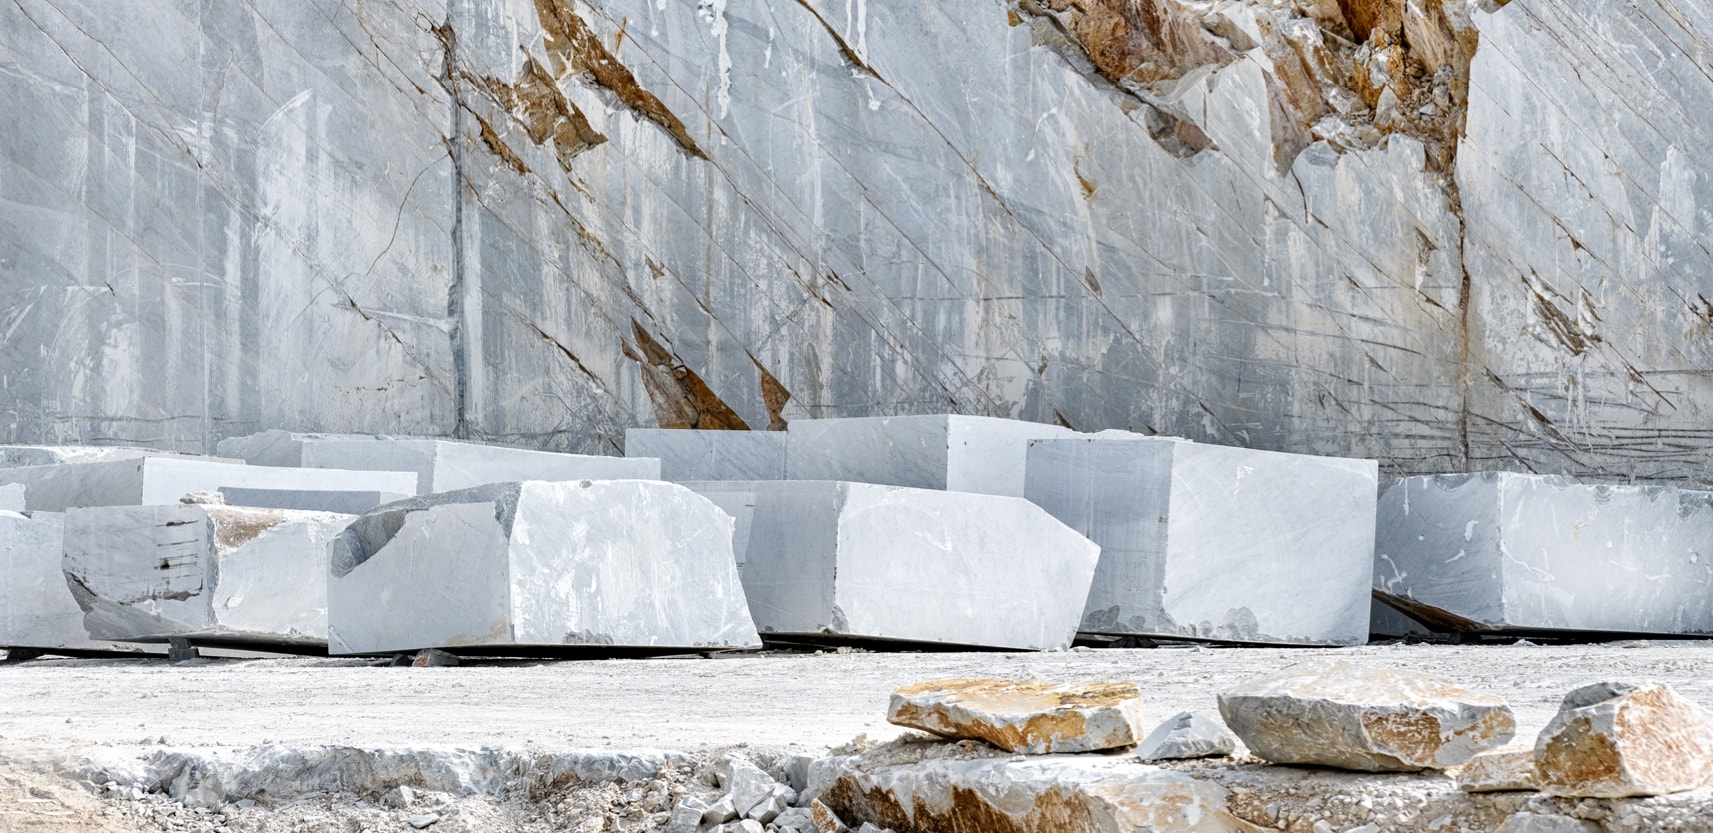 The Carrara Marble Quarries in Tuscany, Italy, epitomize the blending of natural beauty and human craftsmanship. With a history of supplying exceptional marble, these quarries feature stunning white marble with distinctive blue-grey veining. From extraction to intricate craftsmanship, they embody a tradition of dedication. Carrara marble has left an enduring impact on art, architecture, and culture, symbolizing elegance and sophistication. These quarries stand as a bridge between nature's wonders and human ingenuity, encapsulating a timeless legacy of beauty and creativity.